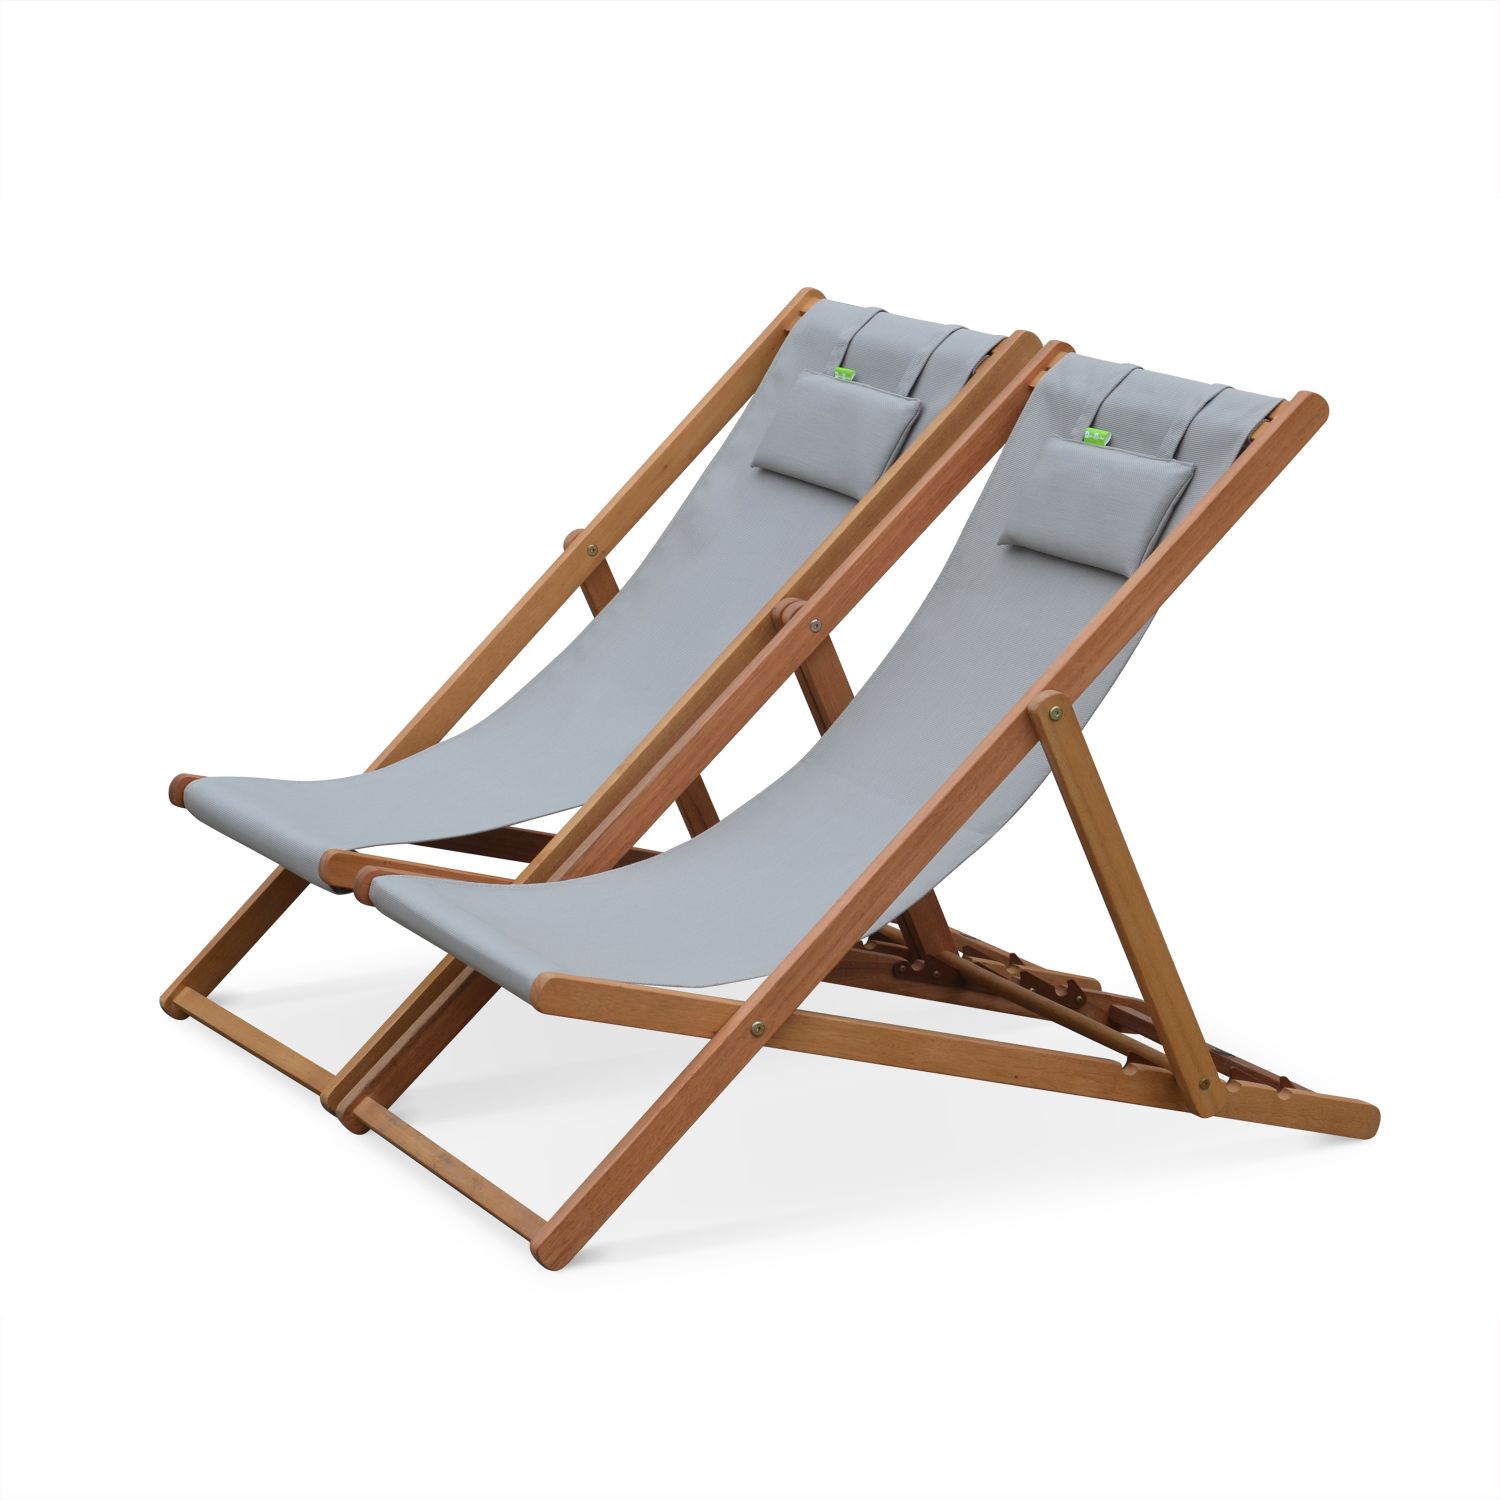 Set of 2 Creus sun loungers, deck chairs in FSC eucalyptus and ...